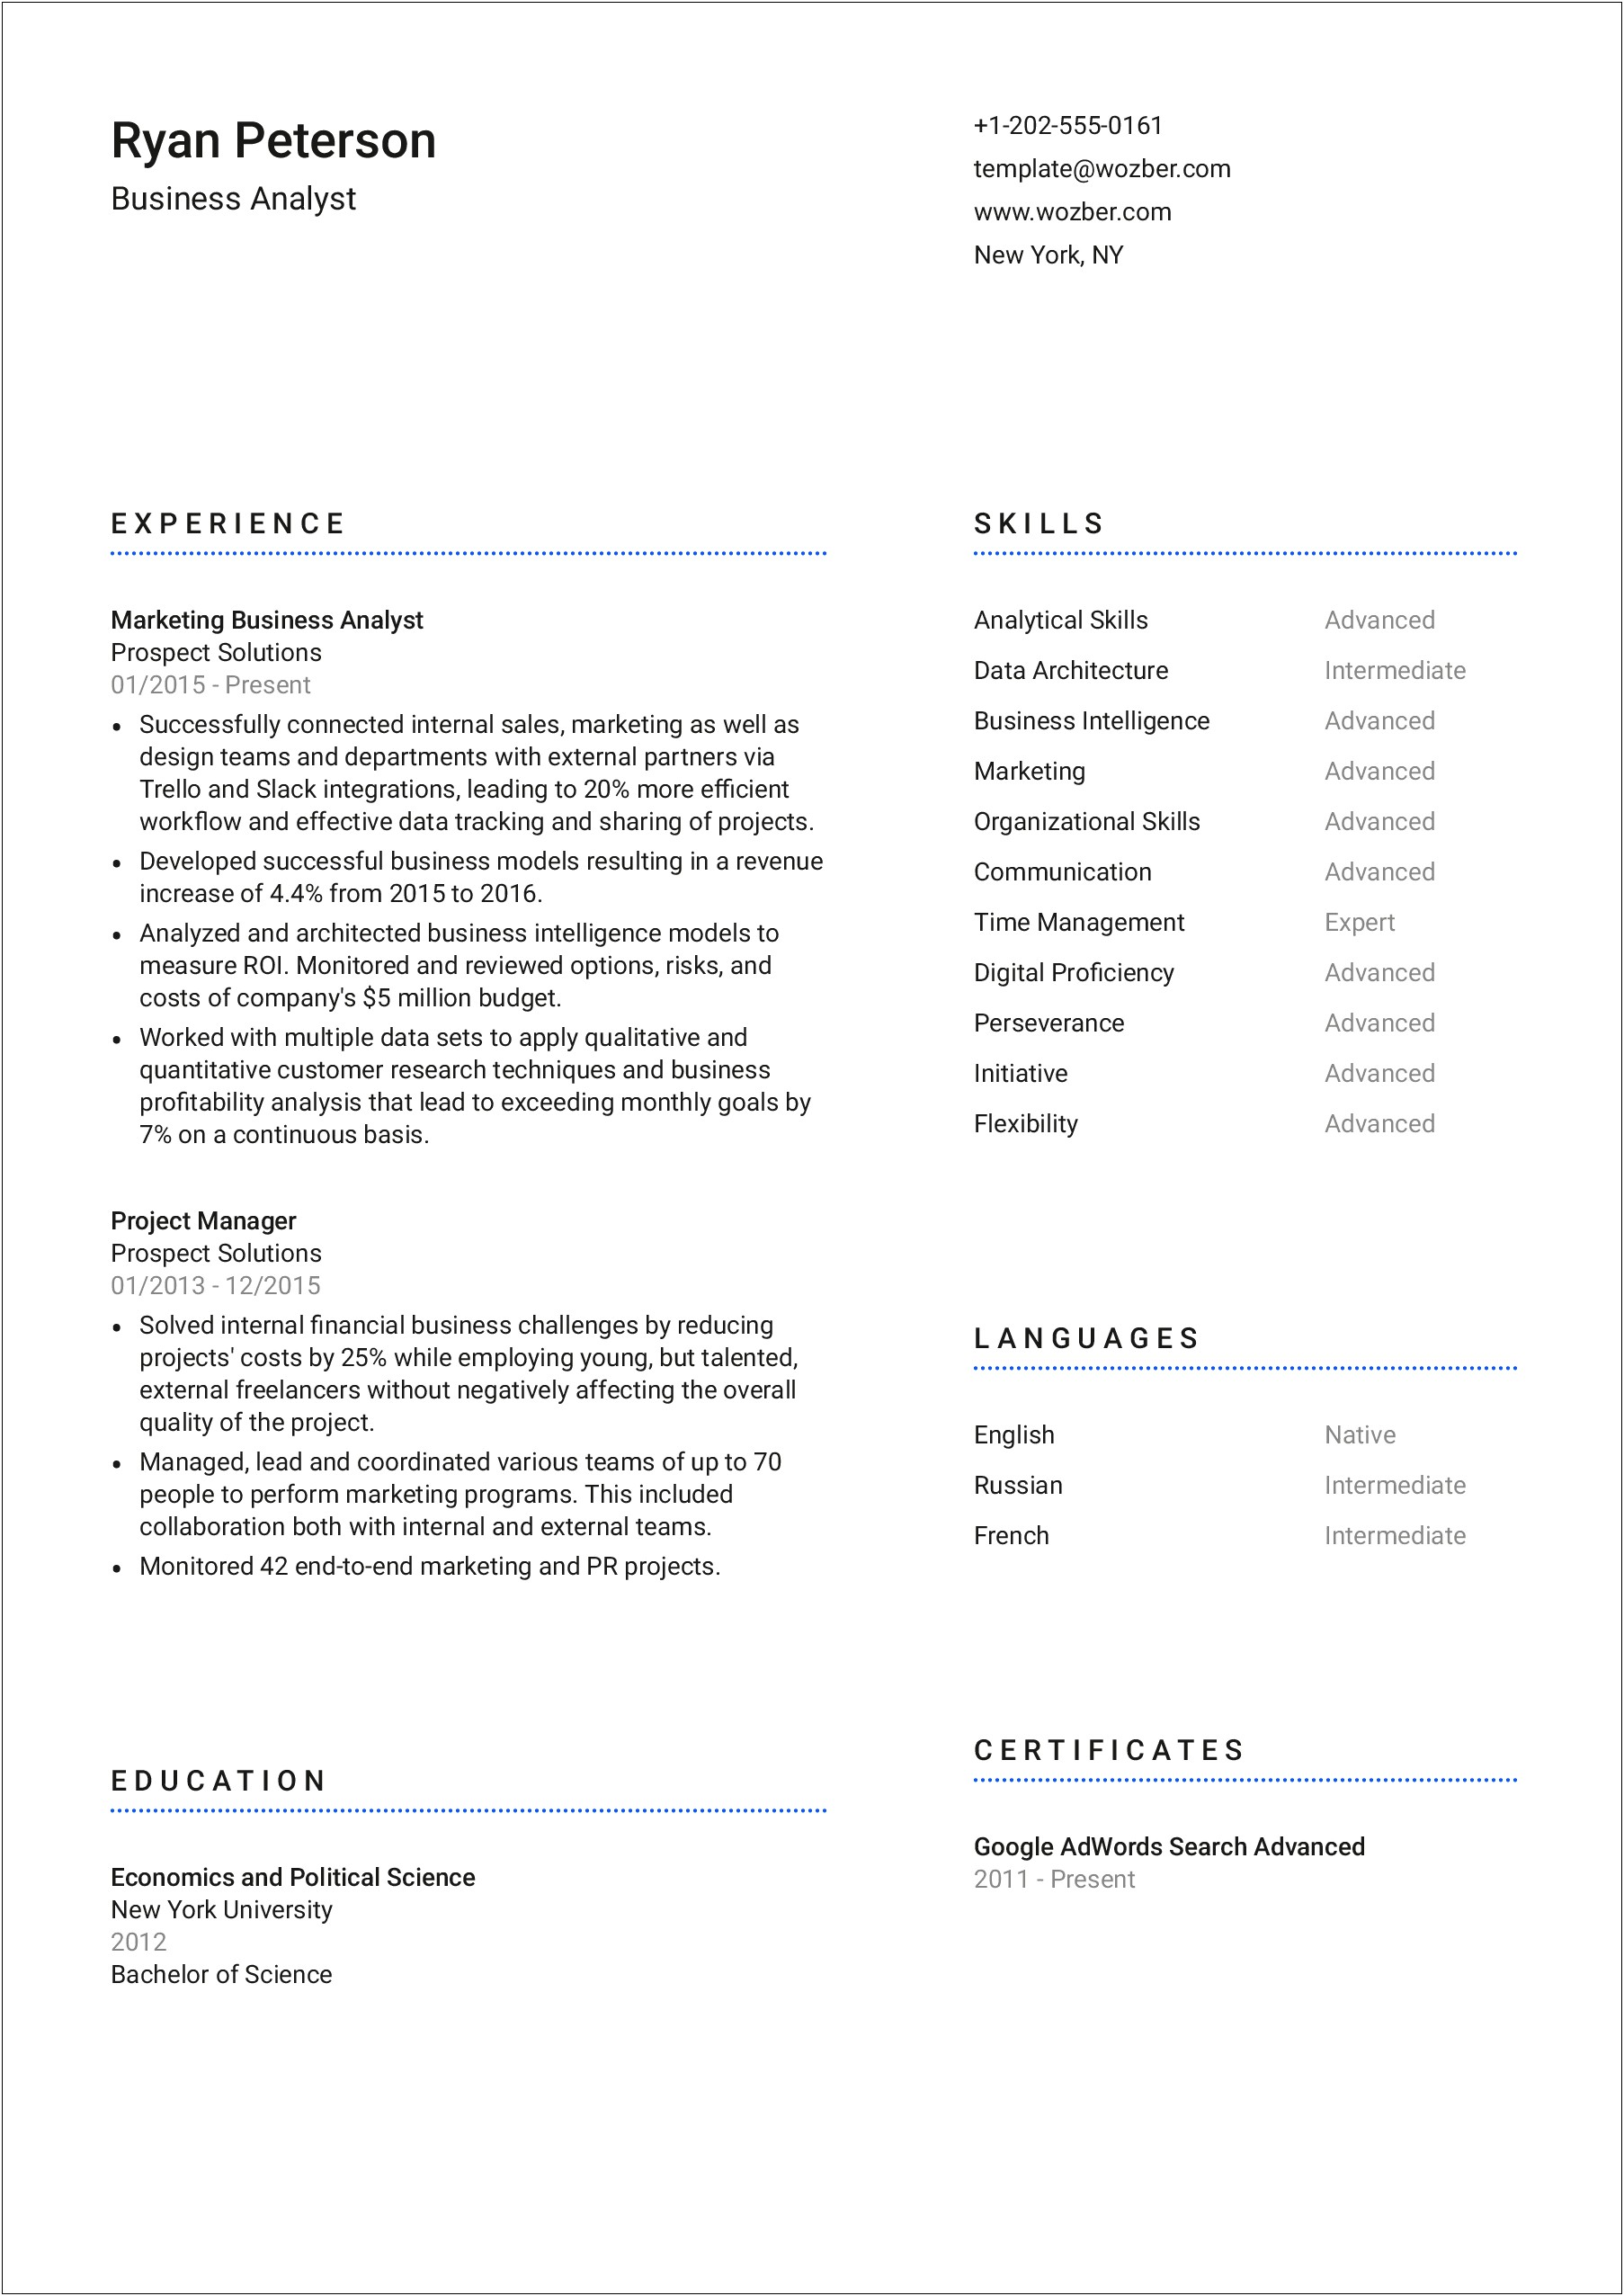 Professional Resume Cover Letter Data Inurl Cover Letter